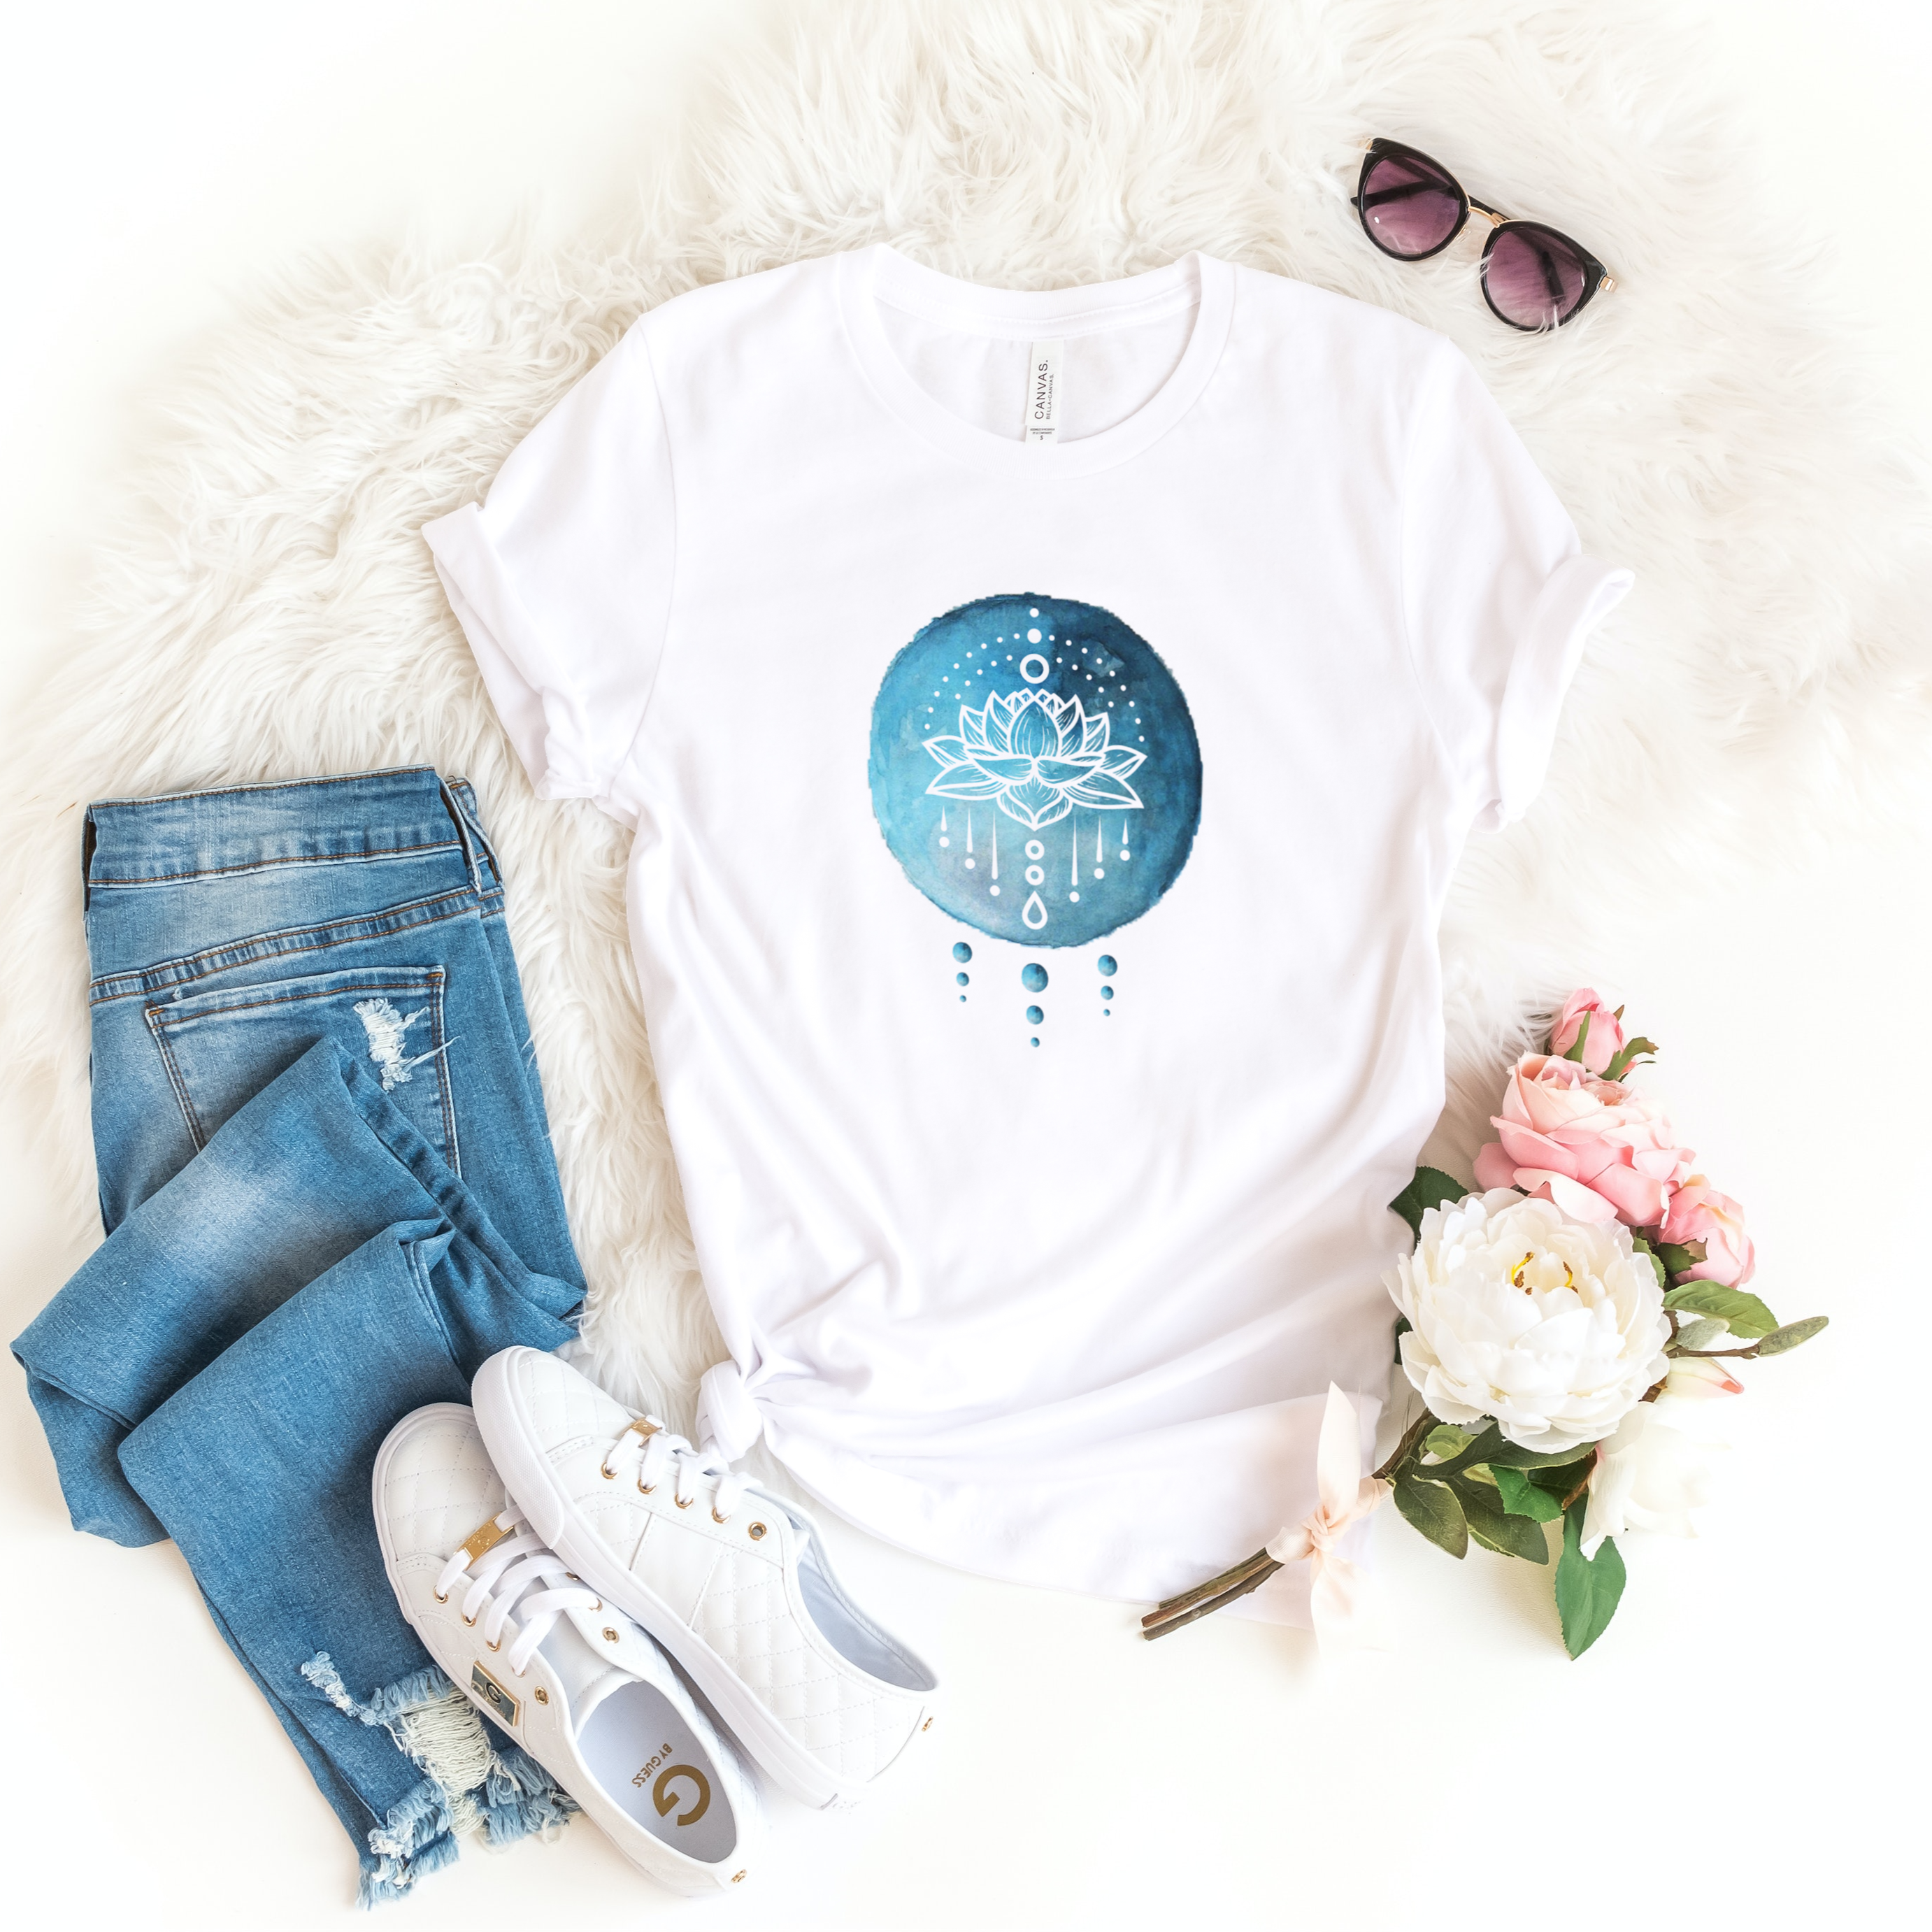 Story of Awakening Lifestyle Community Spirituality Relationships Love Light Meditation Oneness Earth Balance Healing Shop Store Charity Tree Nature Read Write T shirt Tops Tees Clothing Women Horoscope Organic Cotton Lotus Flower Enlightenment Quote